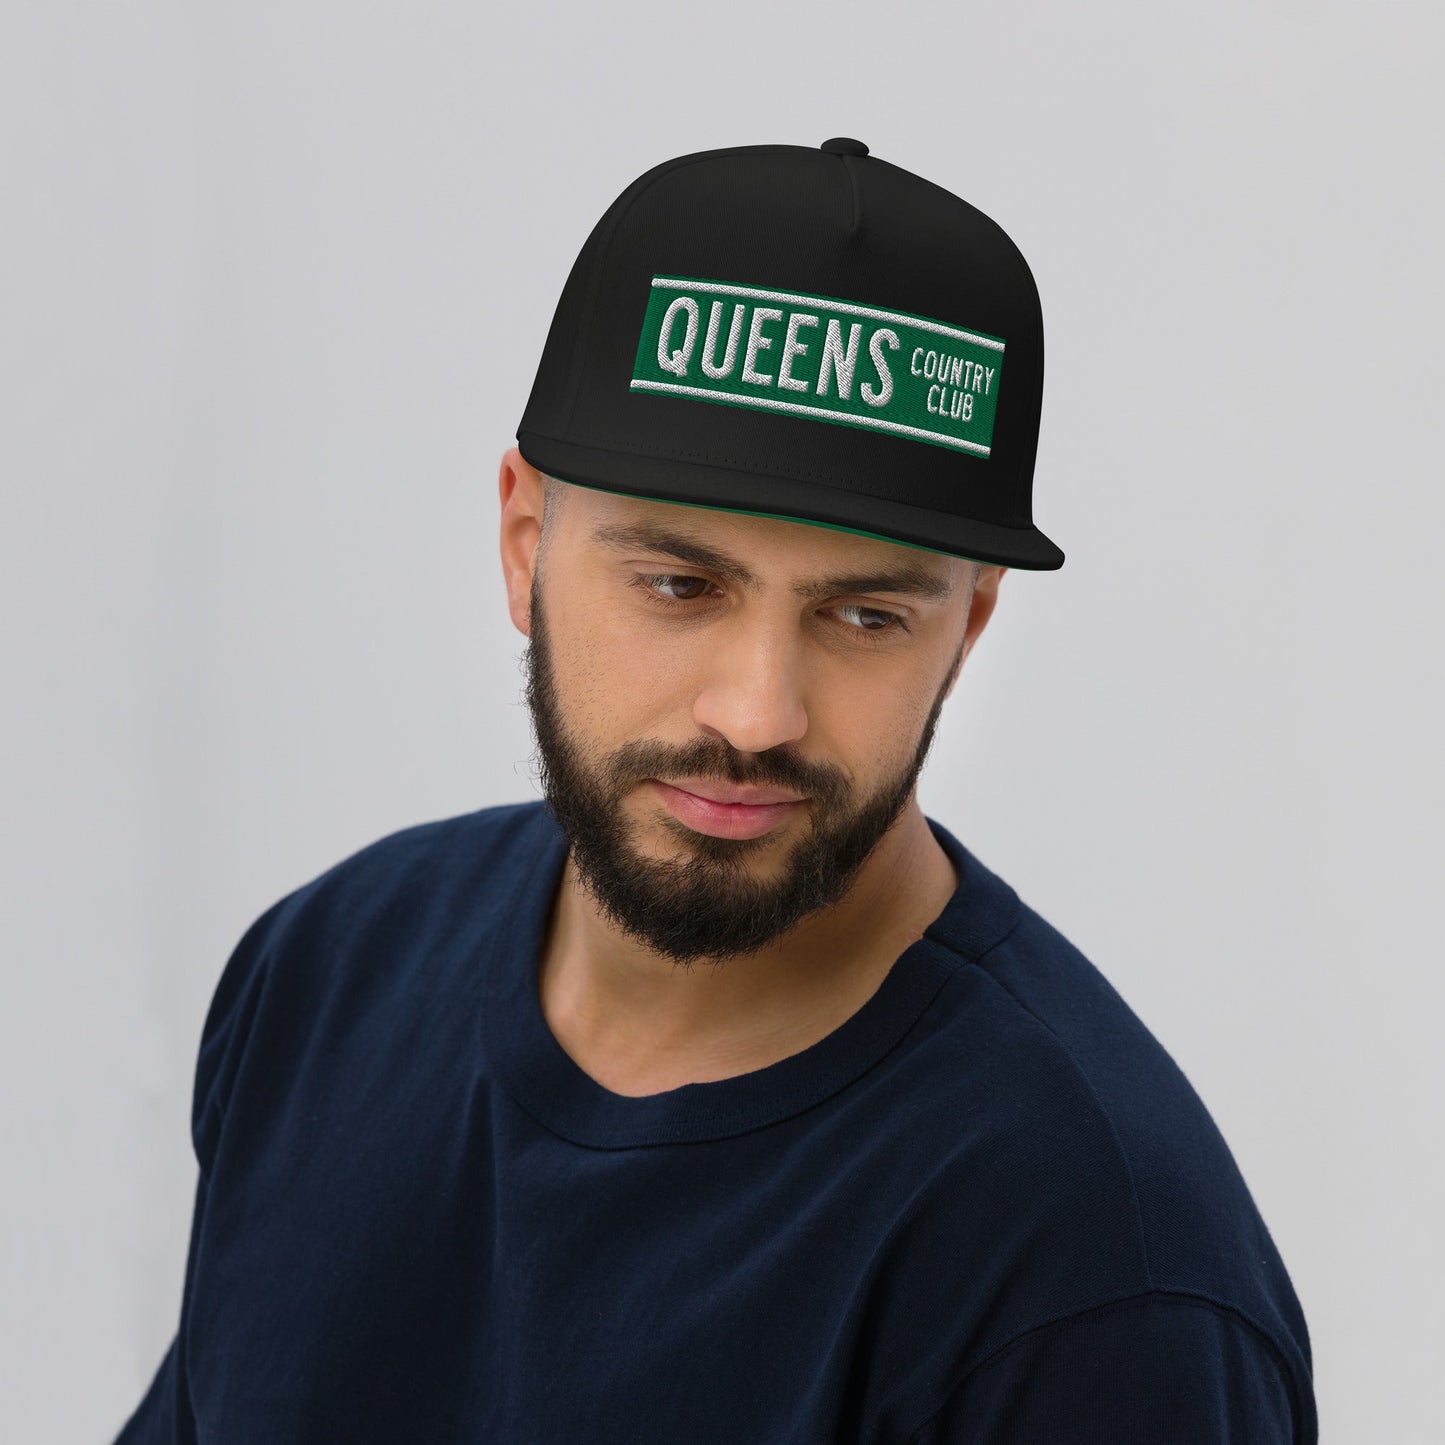 Queens CC Street Sign Flat Bill Cap by Queens Country Club